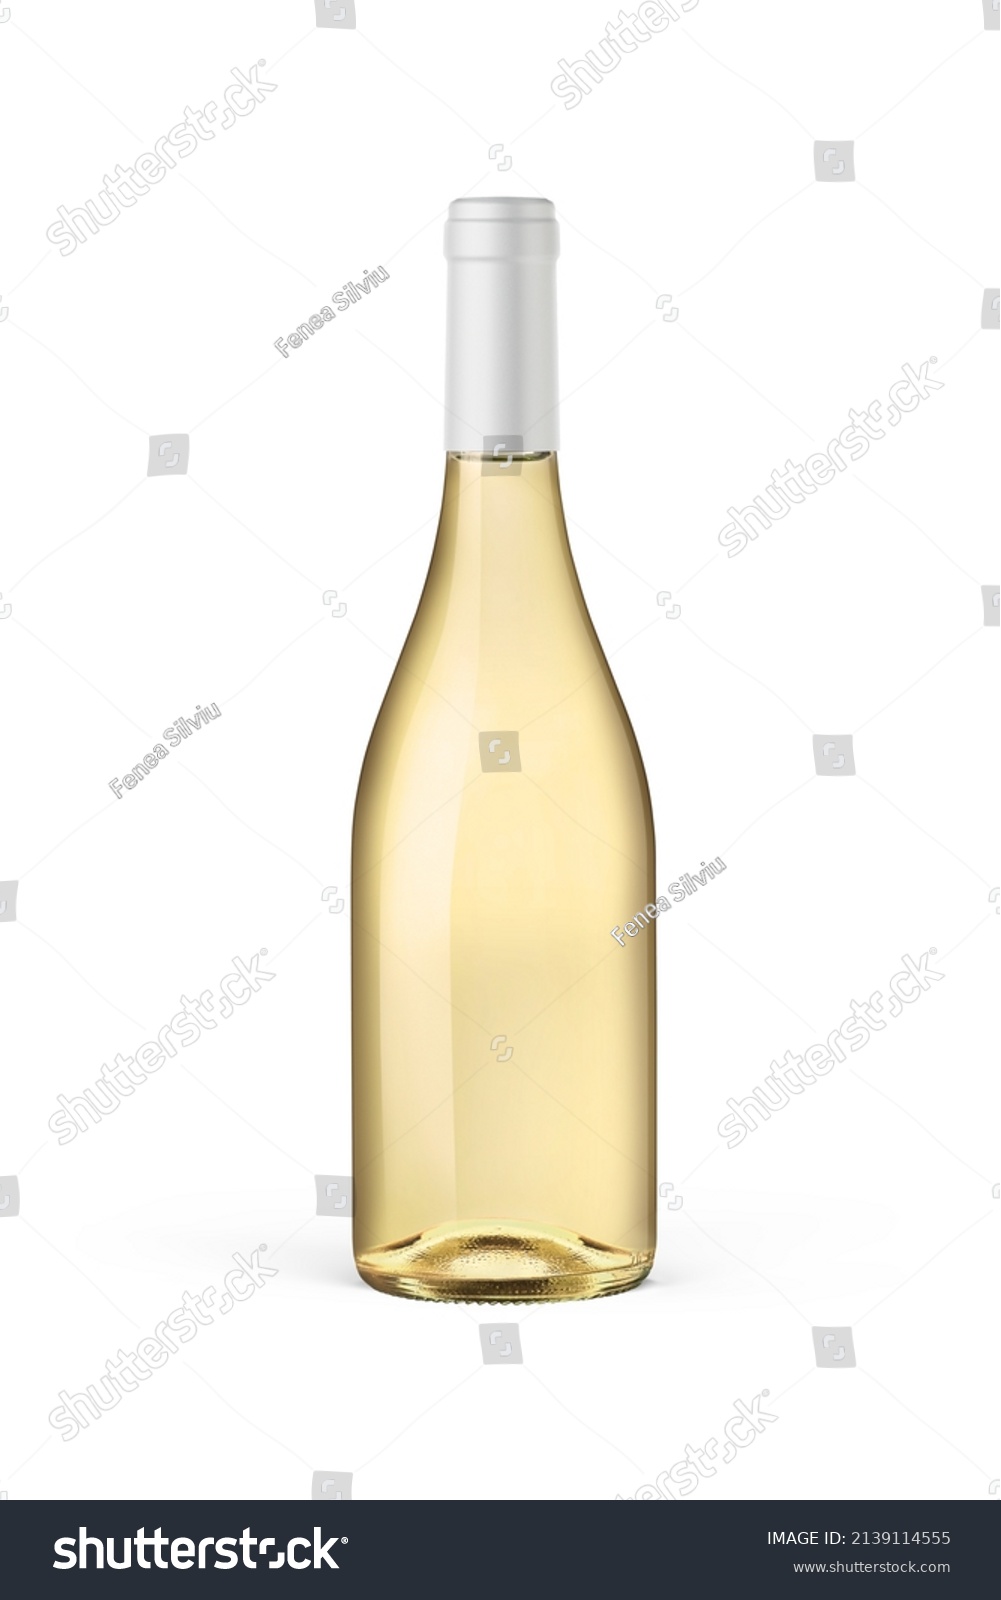 A bottle of white wine isolated on a neutral background for mockup presentation projects. #2139114555